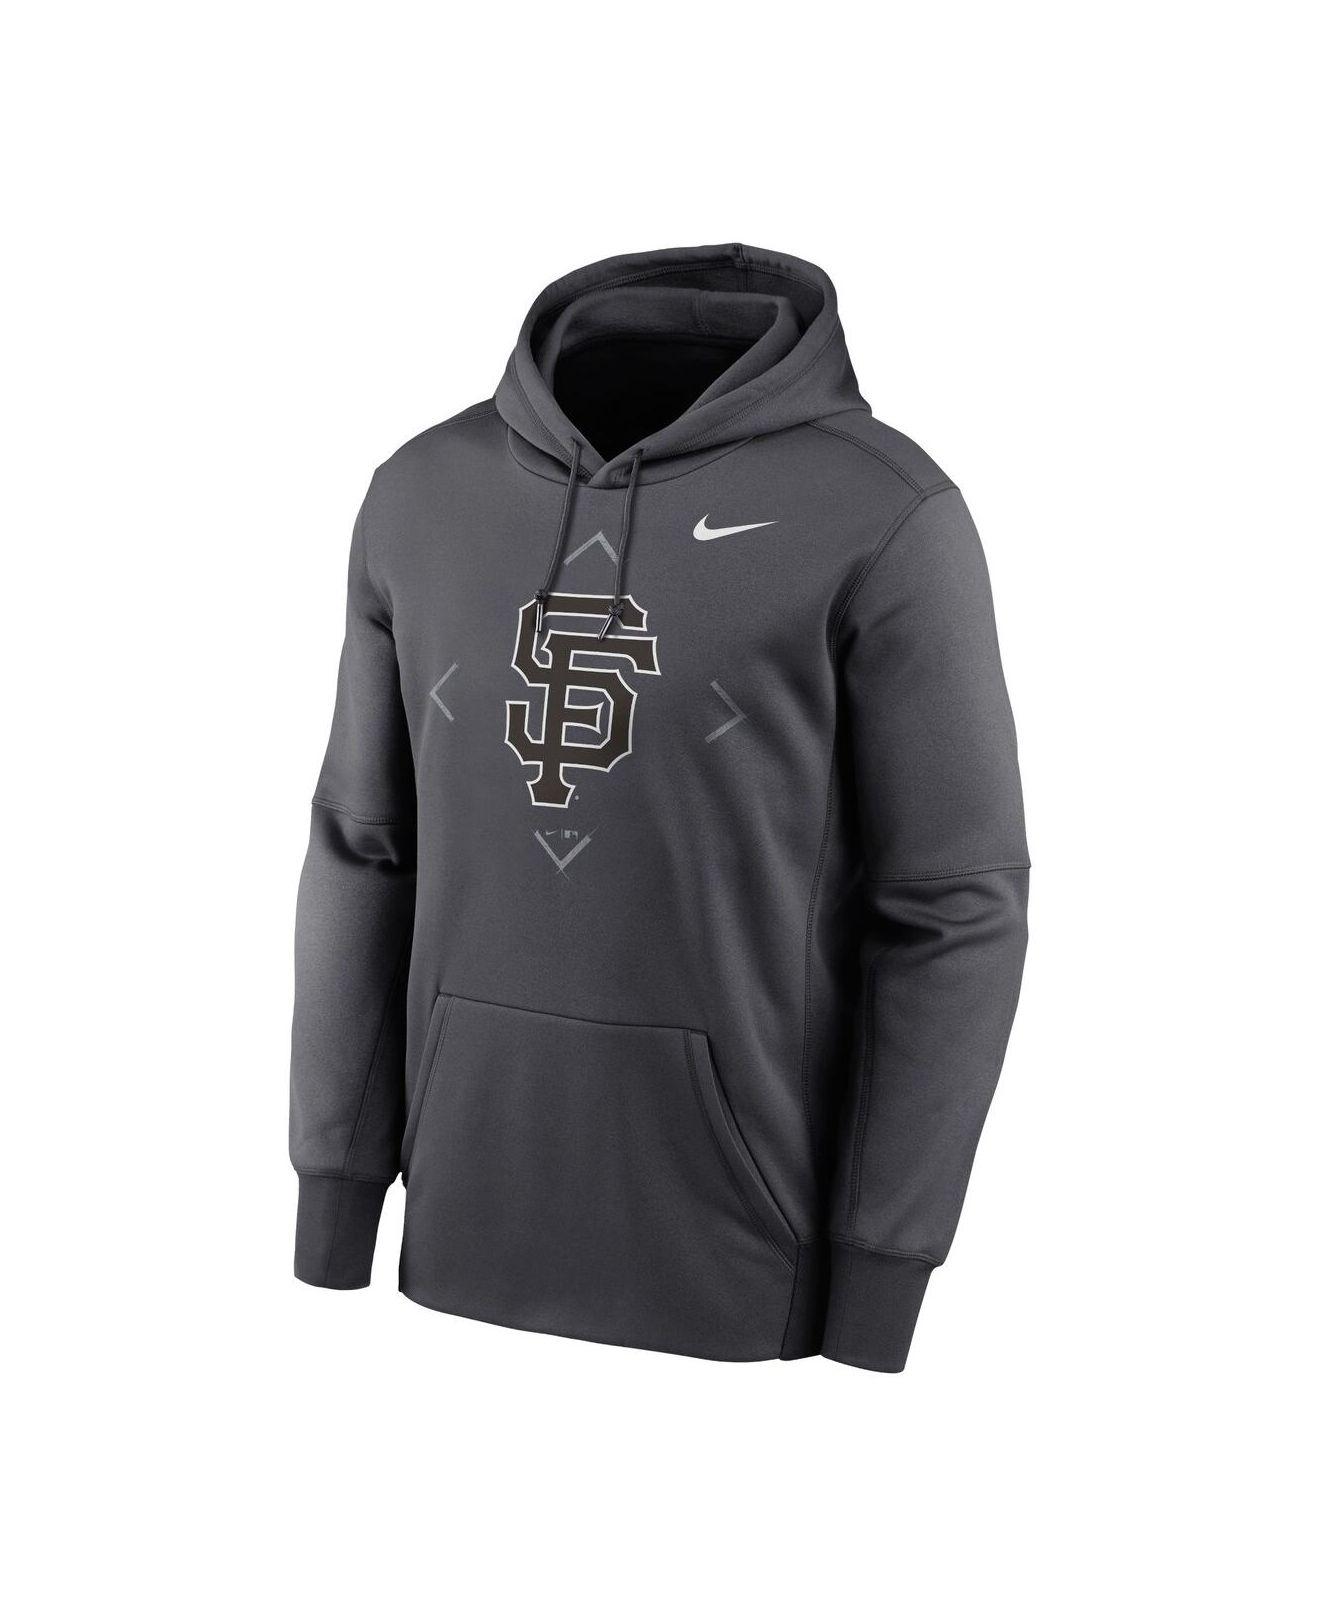 Men's San Francisco Giants Nike Orange City Connect Therma Pullover Hoodie